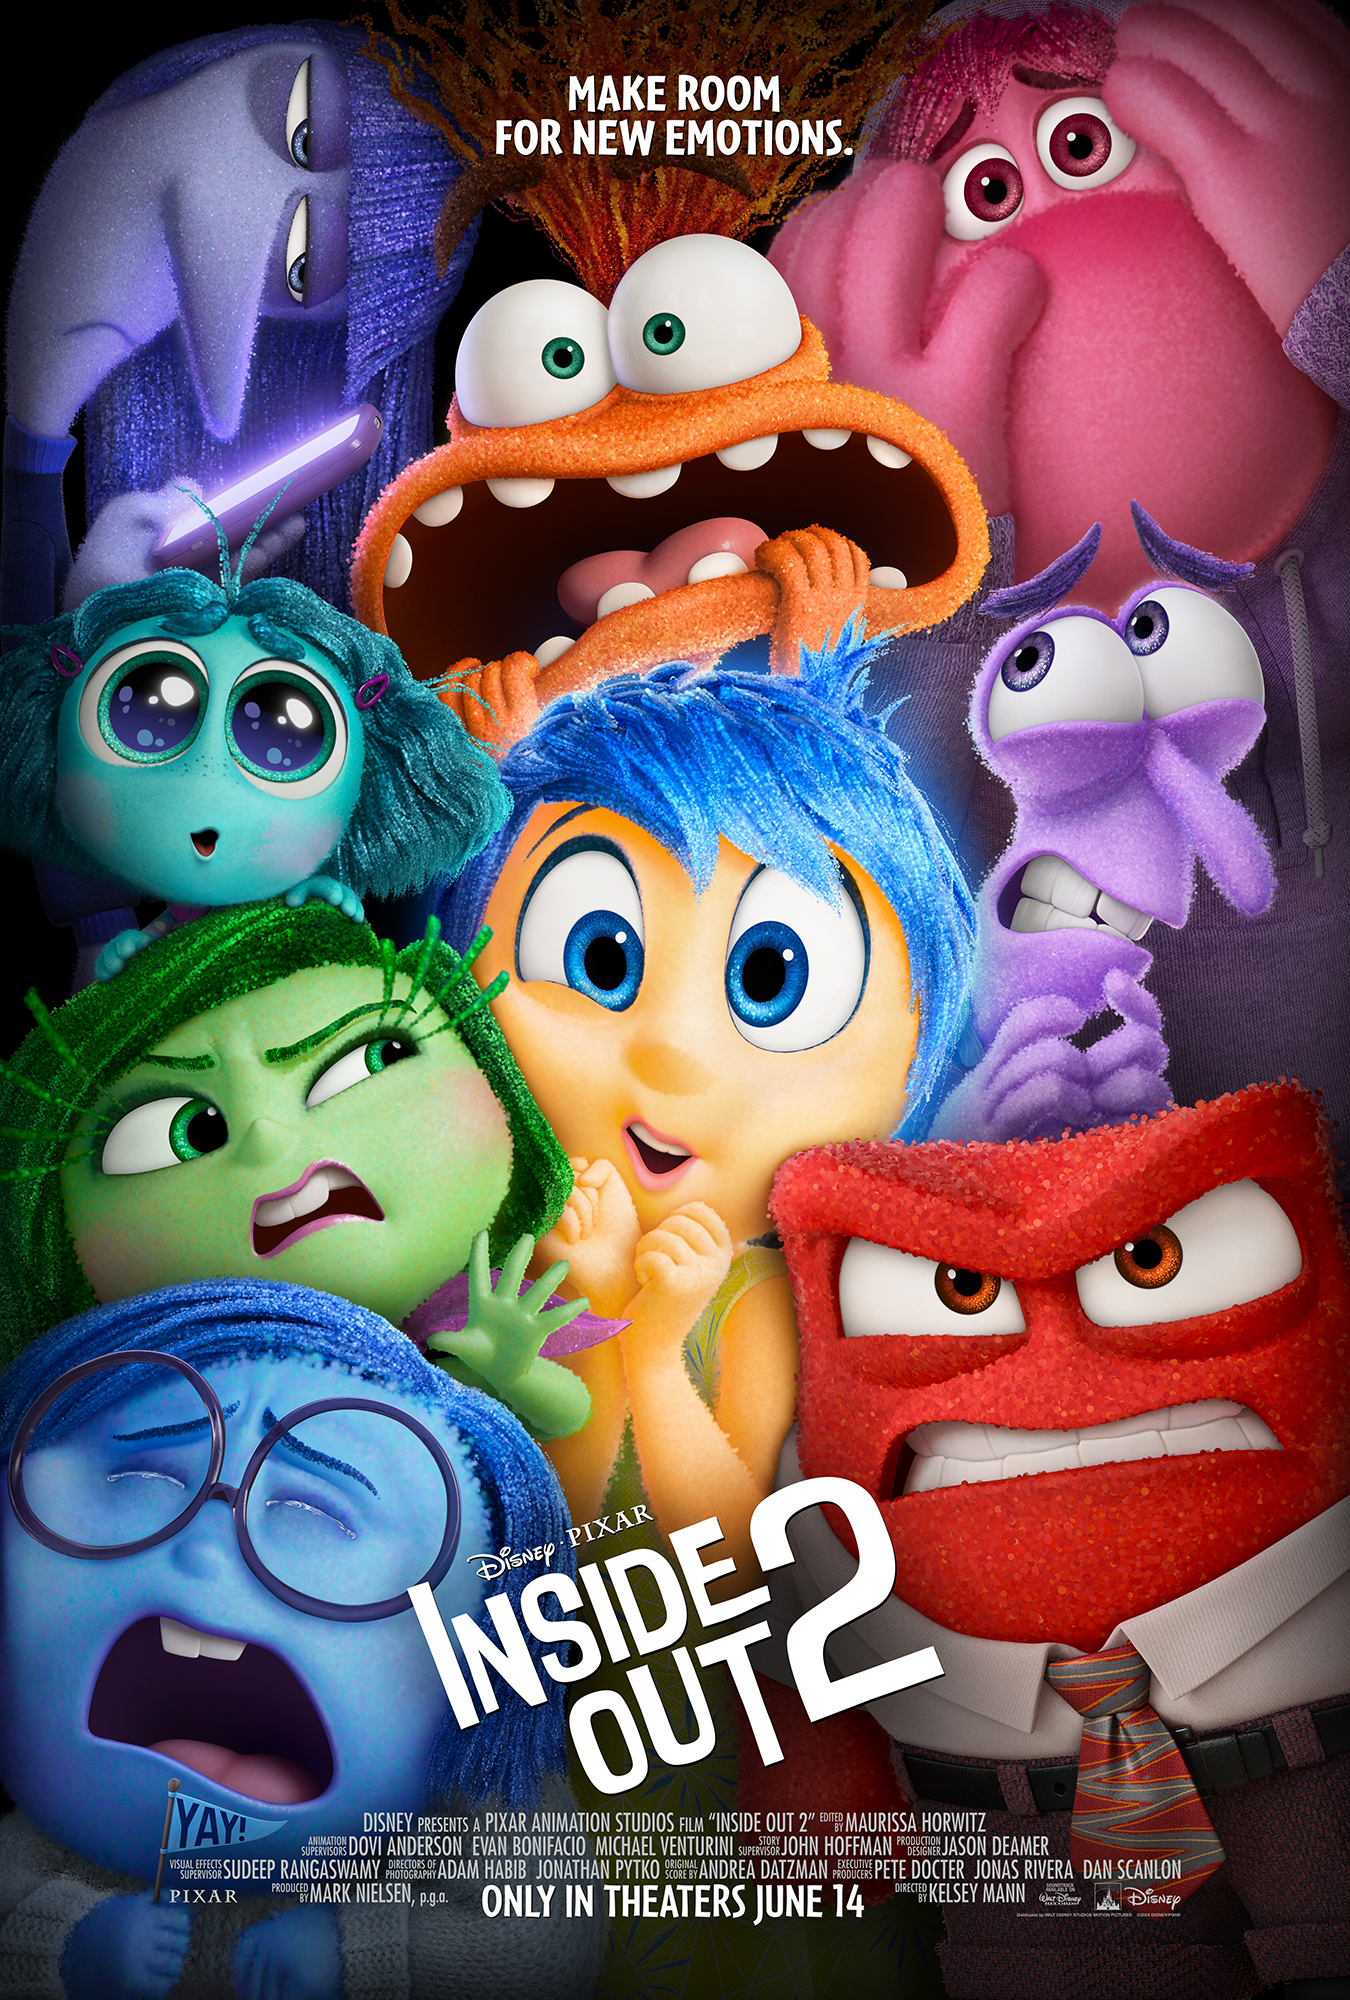 ‘Inside Out 2’ Tops $1 Billion at Box Office, Breaks Animated Movie Record